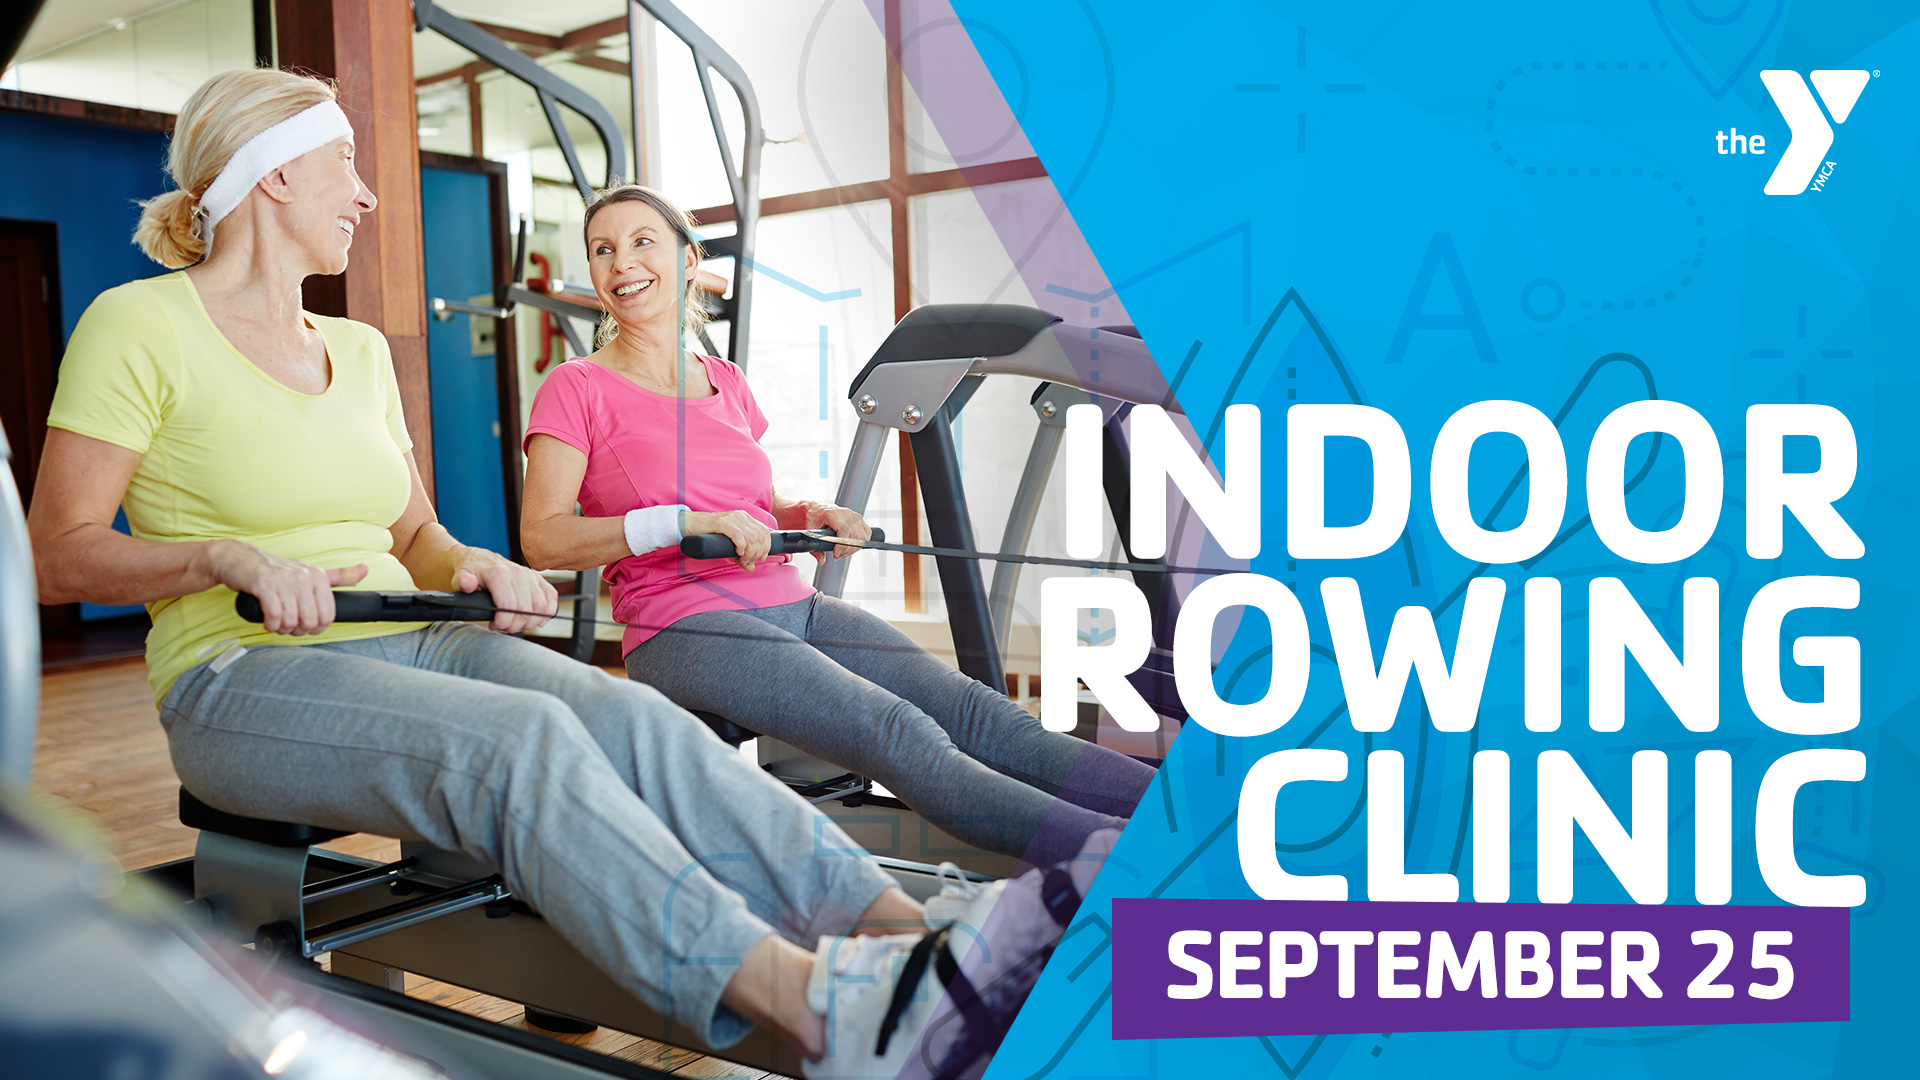 Featured image for “Indoor Row Clinic”